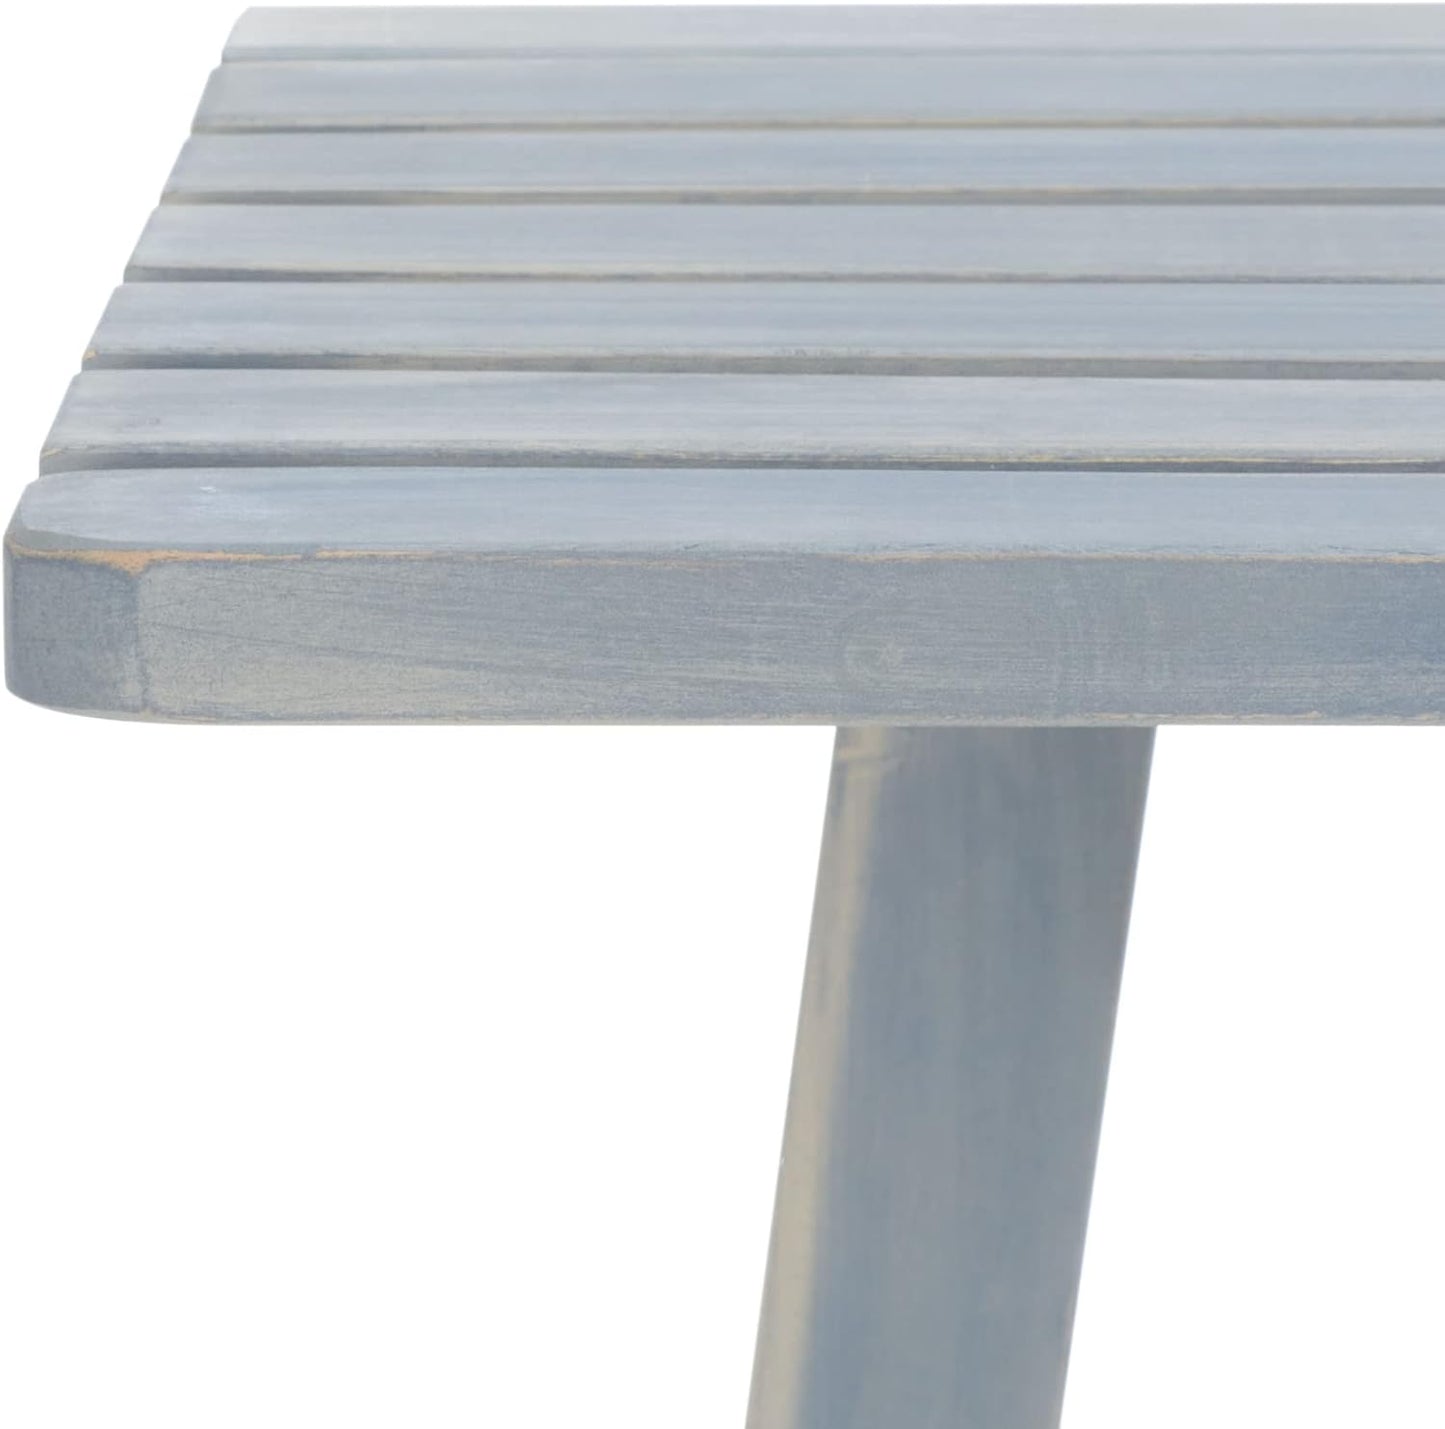 Safavieh Outdoor Collection PAT6755 Table, Ash Grey